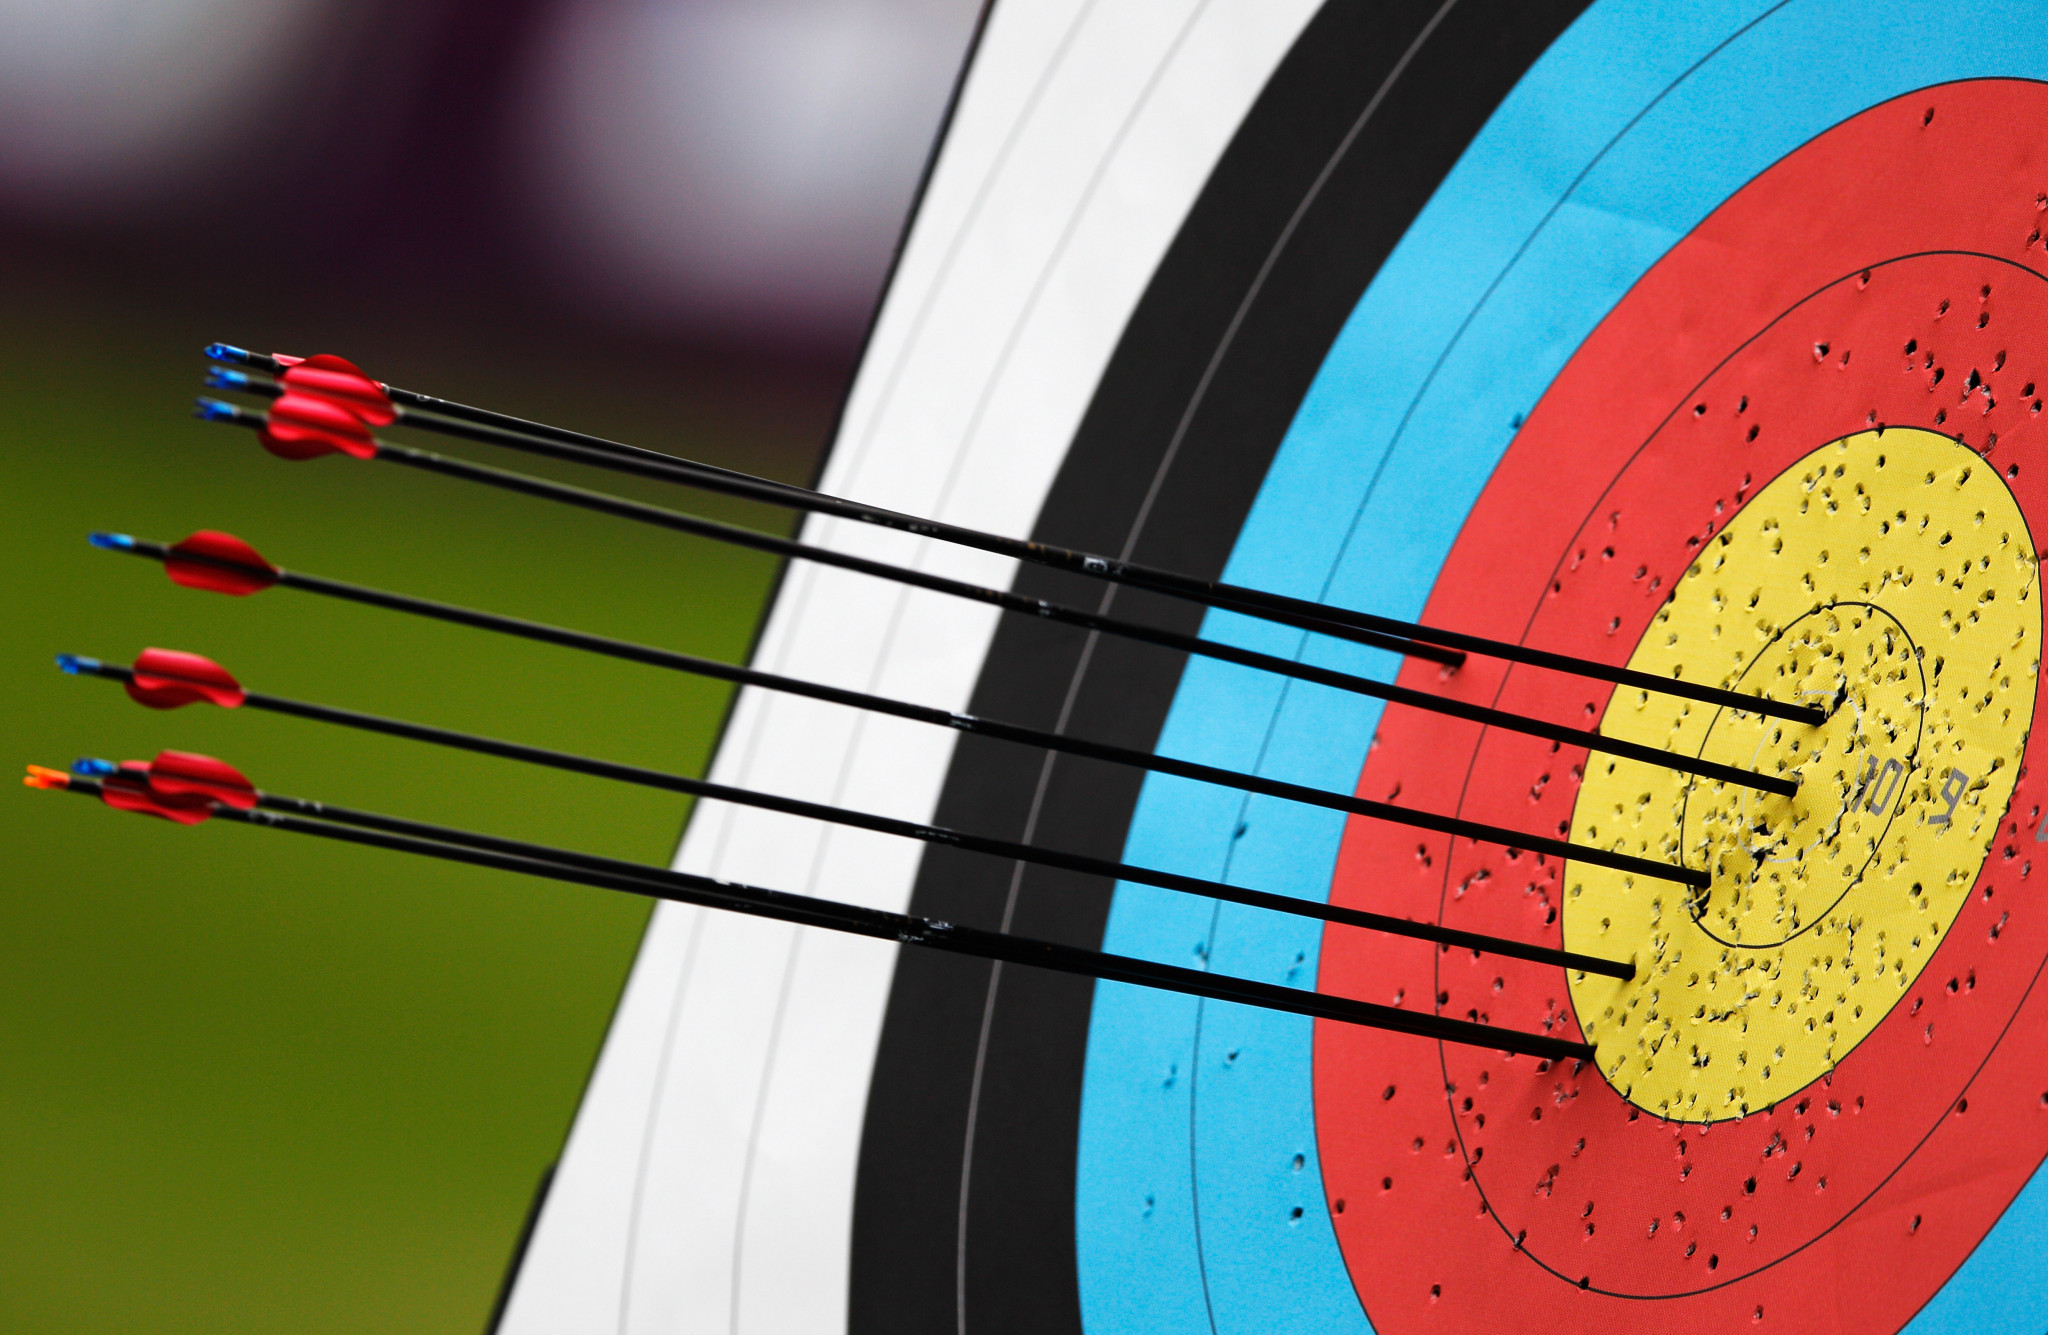 World Archery opposes Russians qualifying for Paris 2024 through Asia route